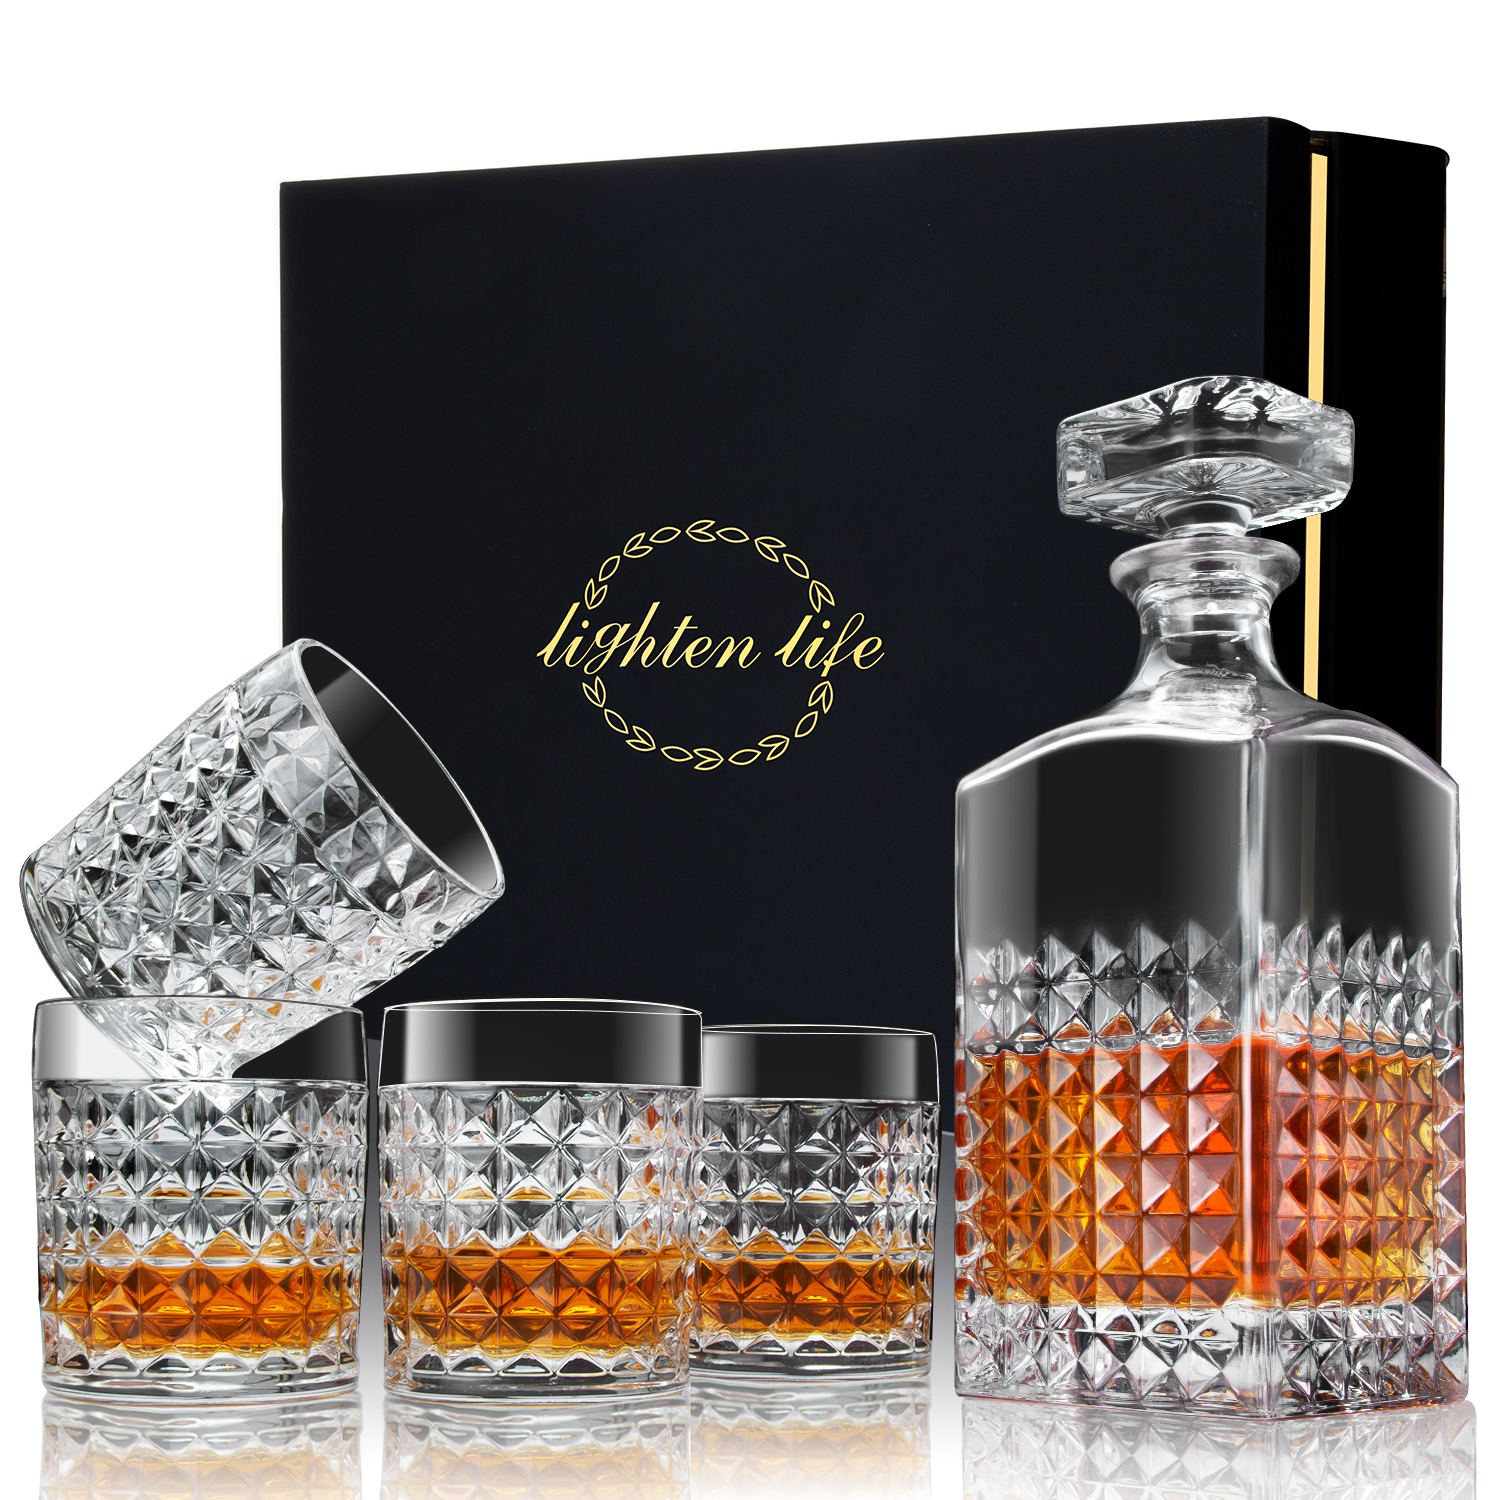 Lighten Life Whisky Decanter Sets,Italian Style Decanter with 4 Glasses Set in Gift Box,Crystal Glass Decanter Set for Bourbon,Scotch,Liquor,Whiskey Decanter Sets for Men and Women - image 1 of 6